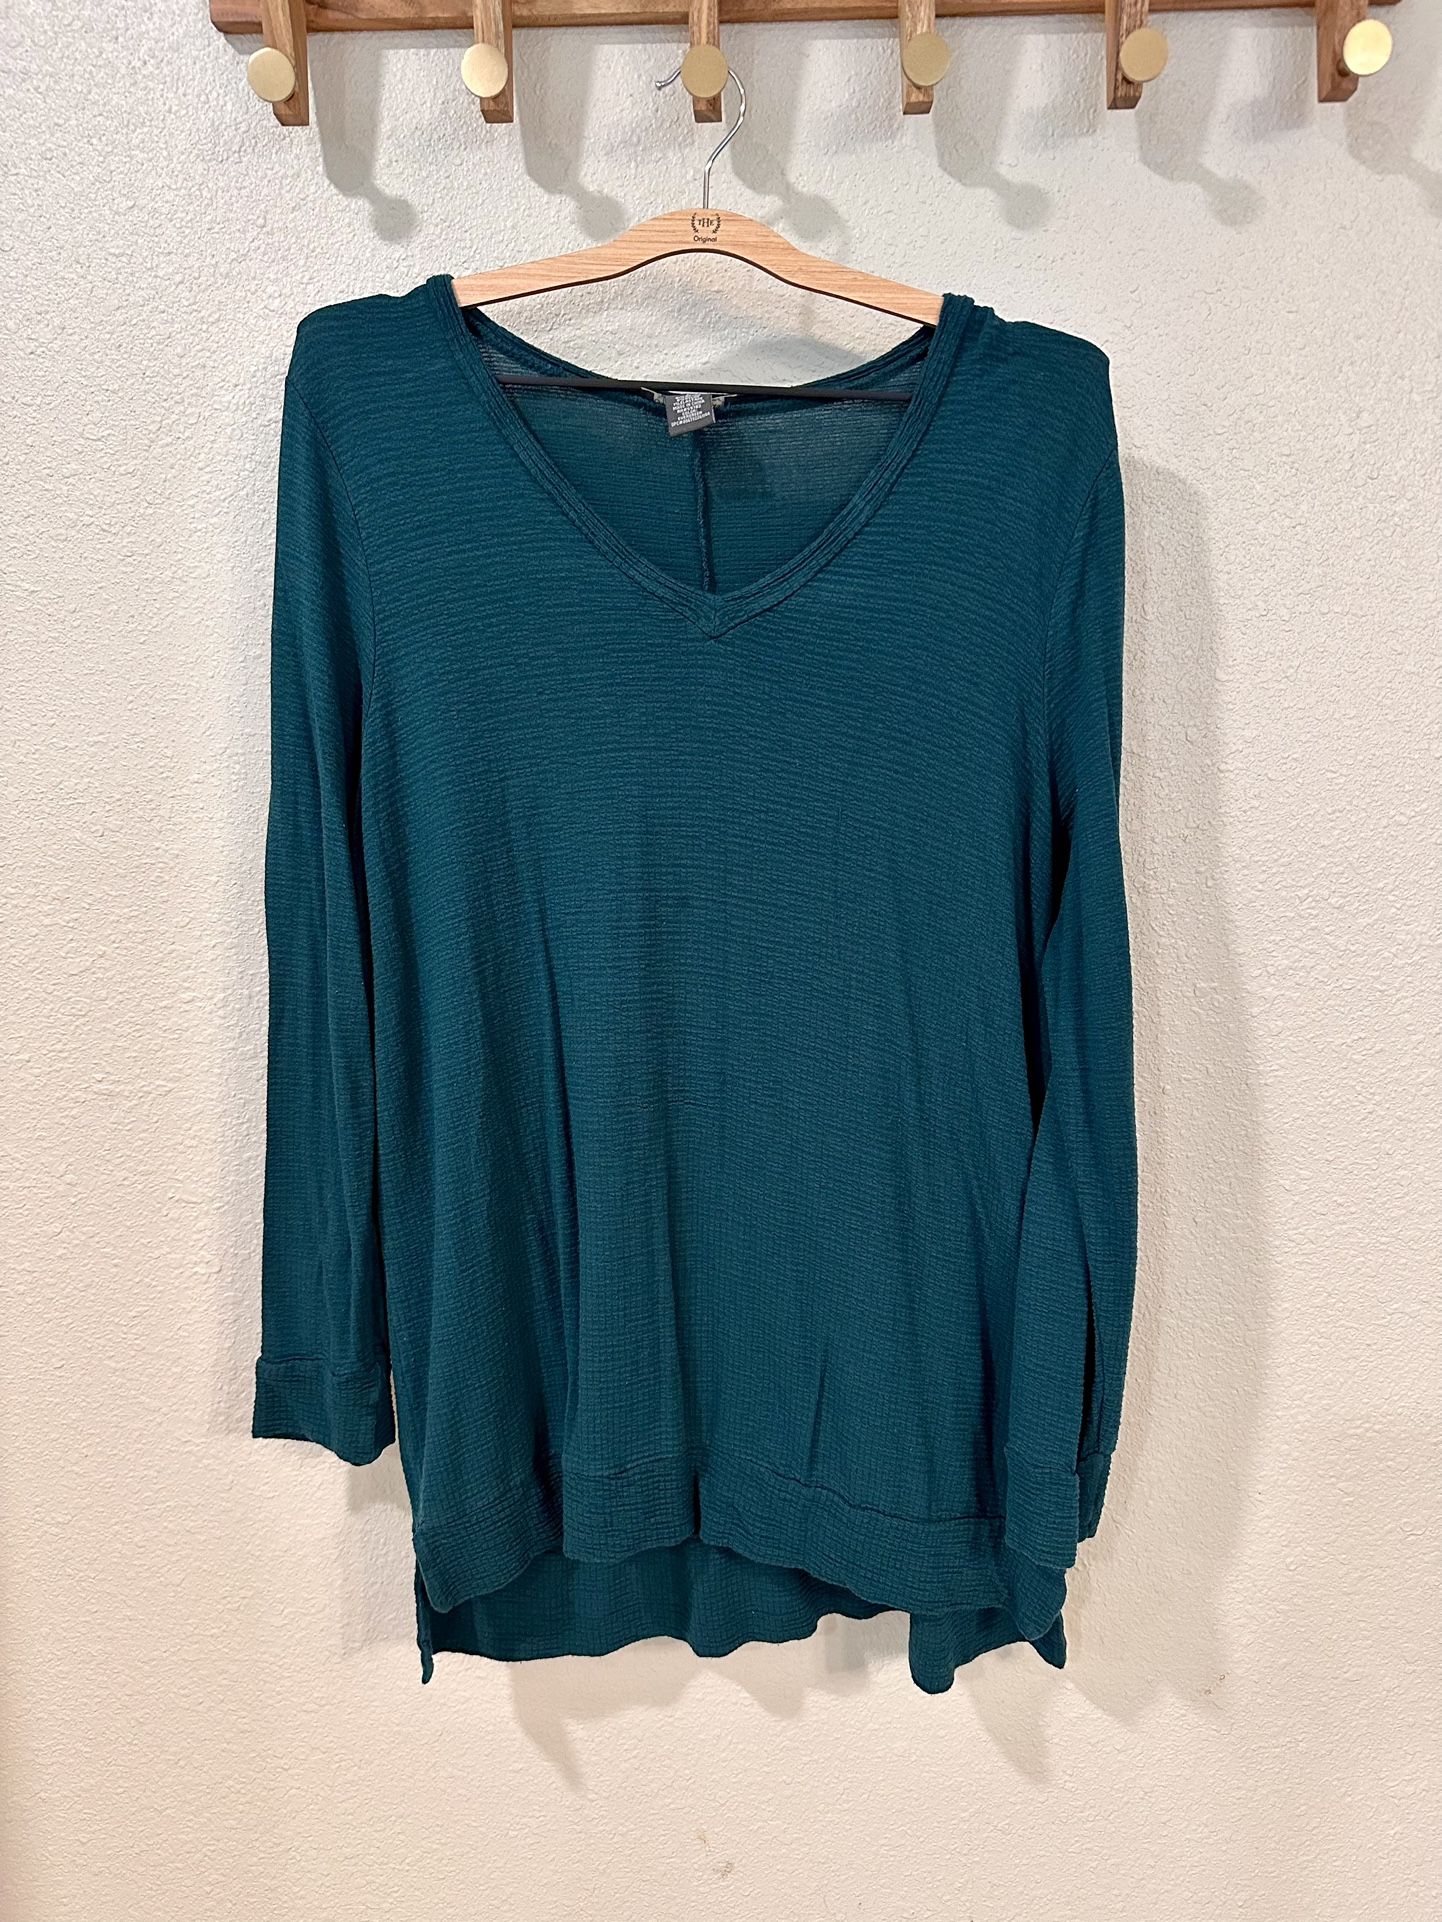 Adrianna Papell teal v-neck tunic